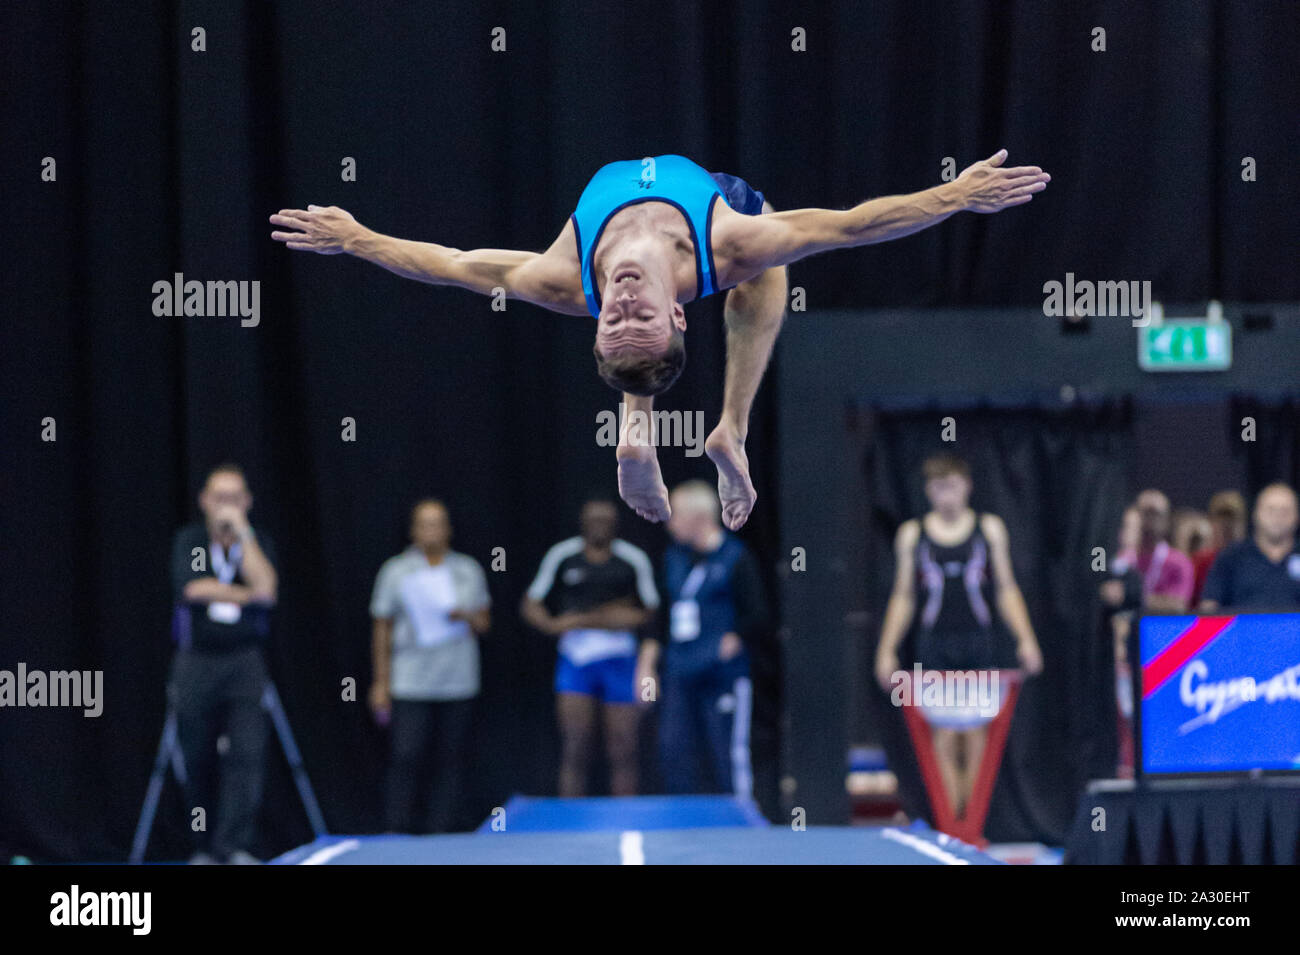 Birmingham, England, UK. 28 September 2019. Andreas Adams (Aberystwyth Gymnastics Club) in action during the Trampoline, Tumbling and DMT British Championship Qualifiers at the Arena Birmingham, Birmingham, UK. Stock Photo